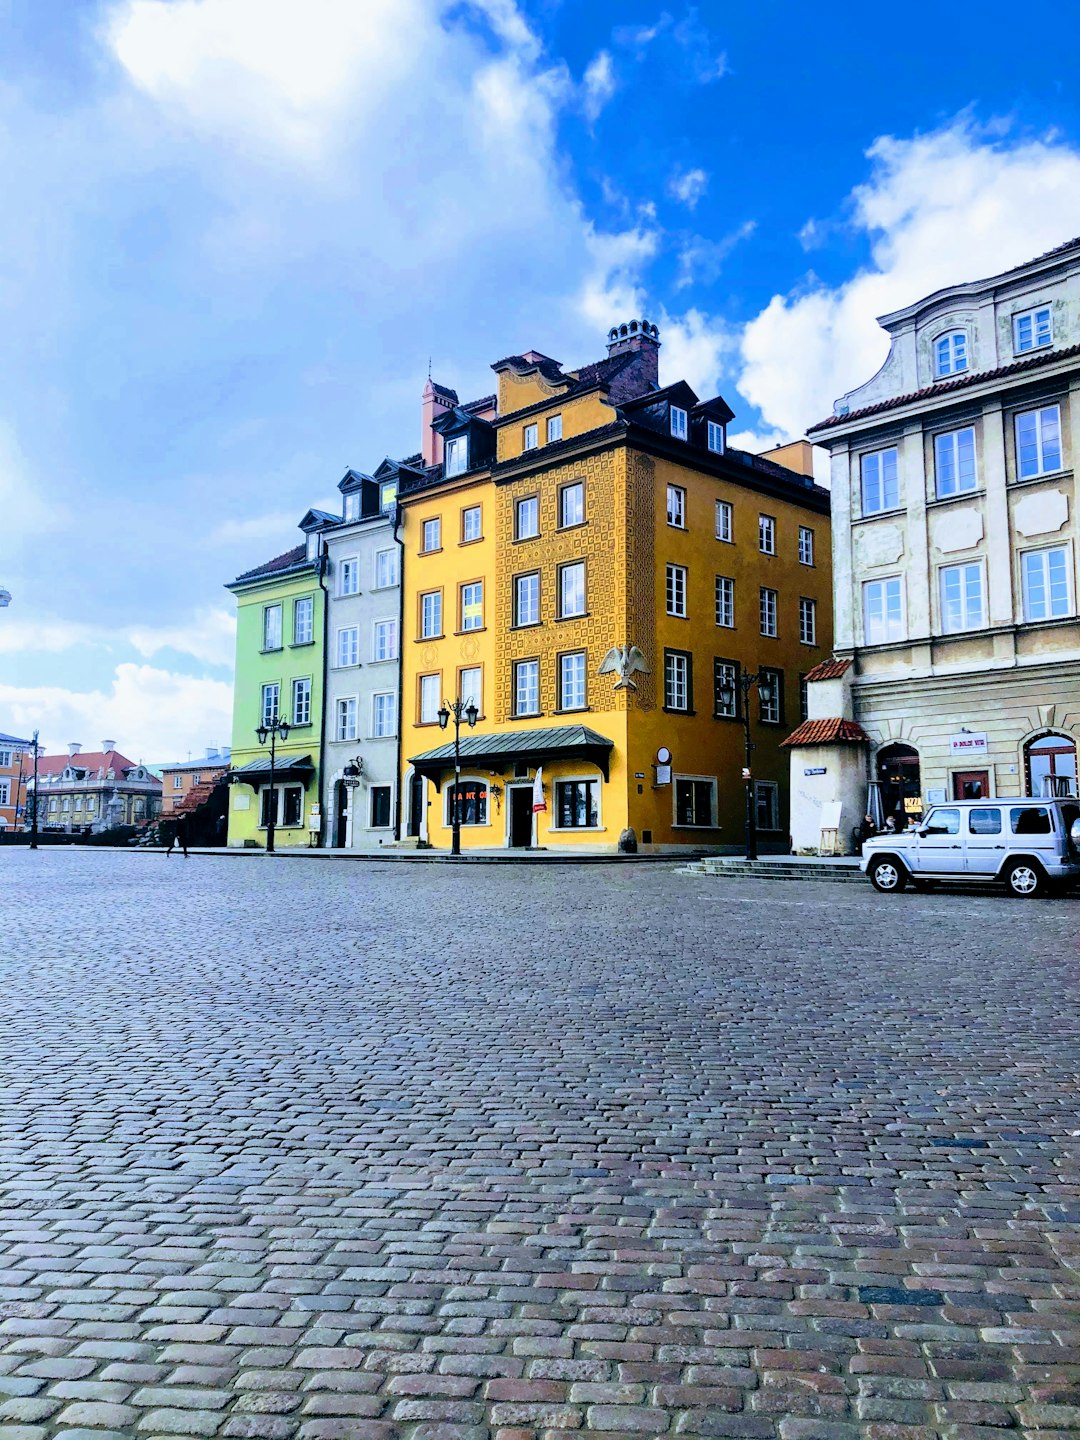 Travel Tips and Stories of Warsaw Old Town in Poland